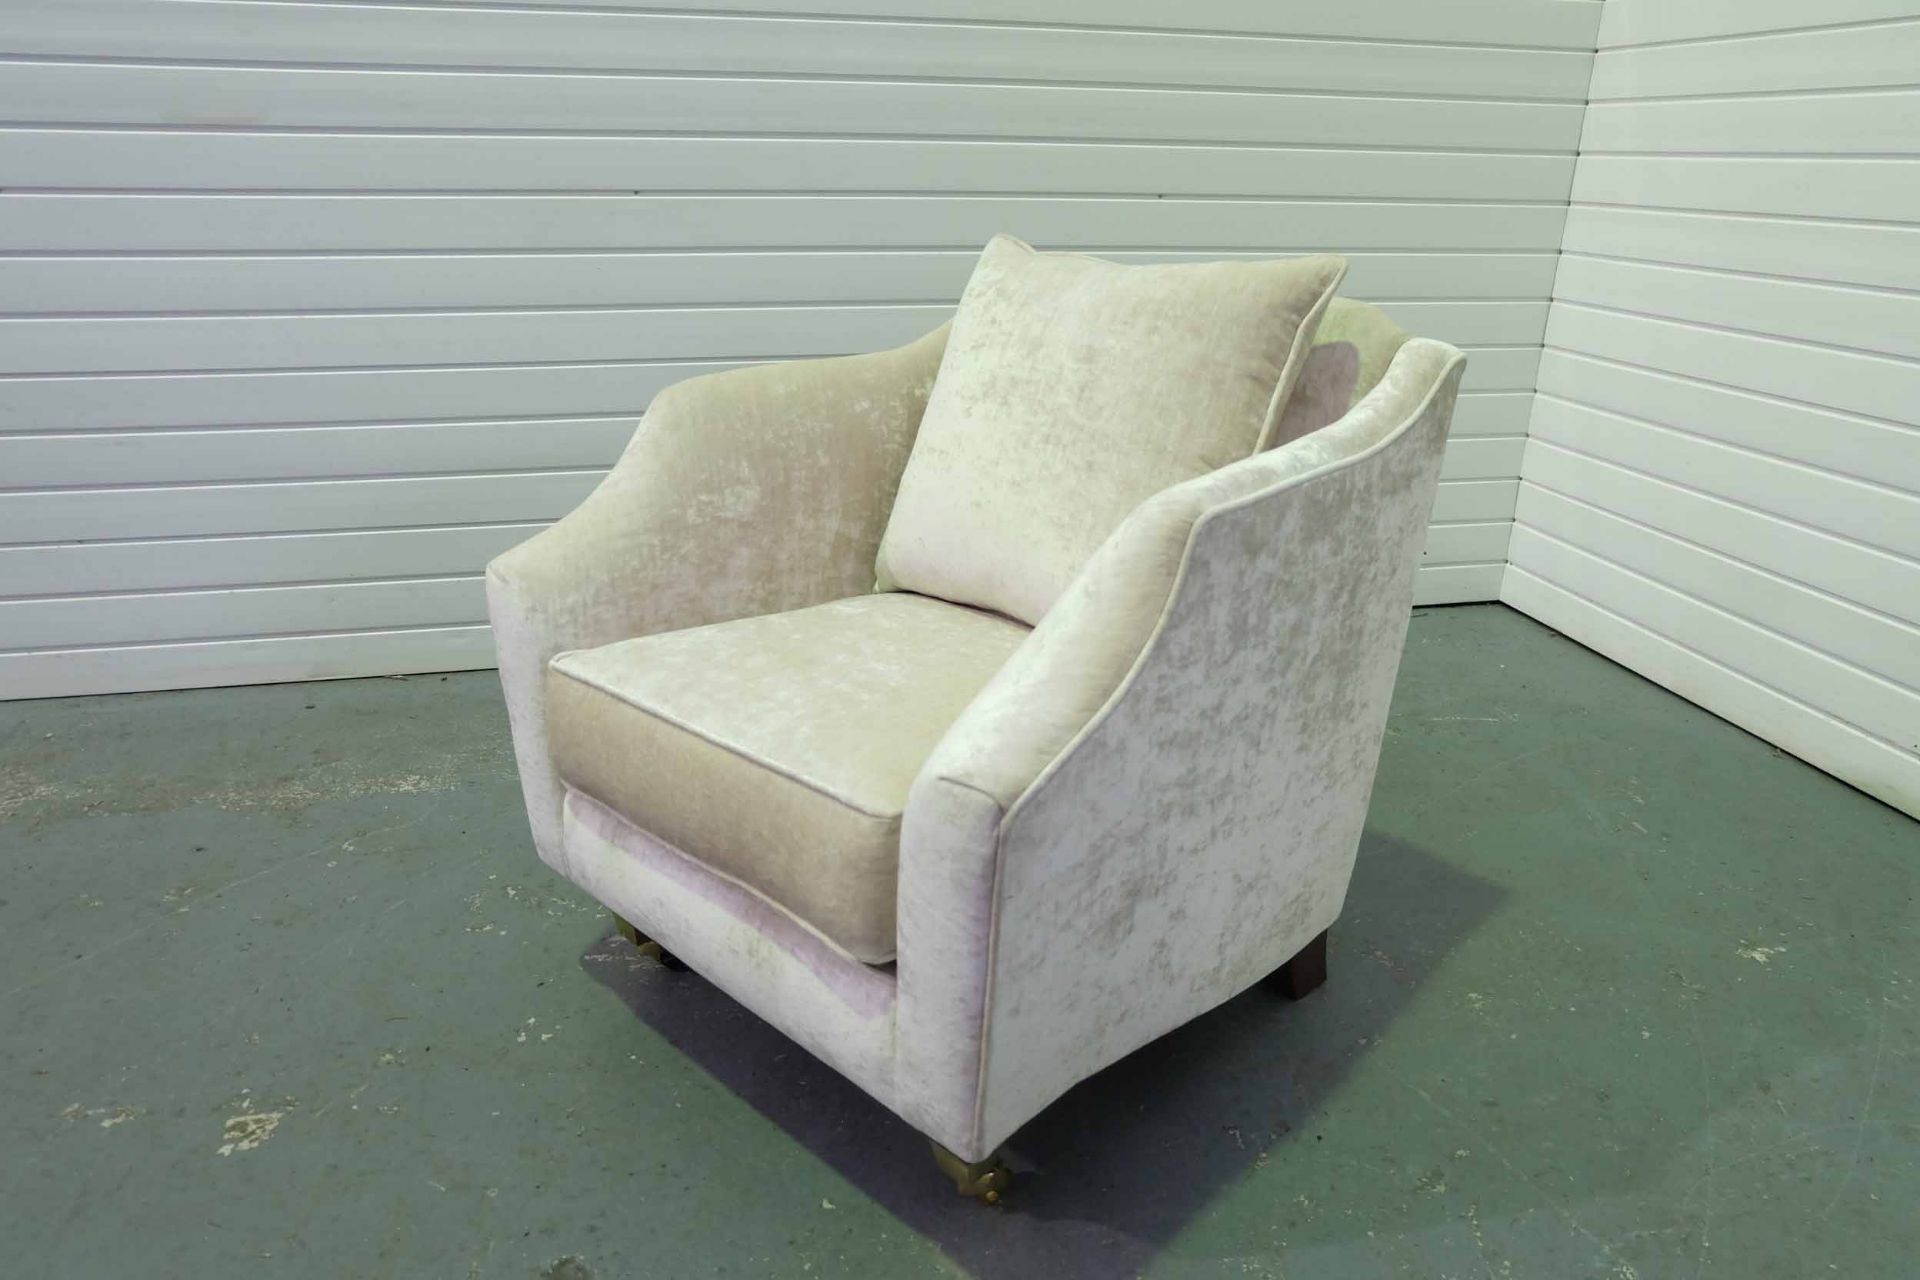 Steed Upholstery 'Hockley' Range Fully Handmade Chair. With Castor Wheels to the Front of the Chair. - Image 2 of 4